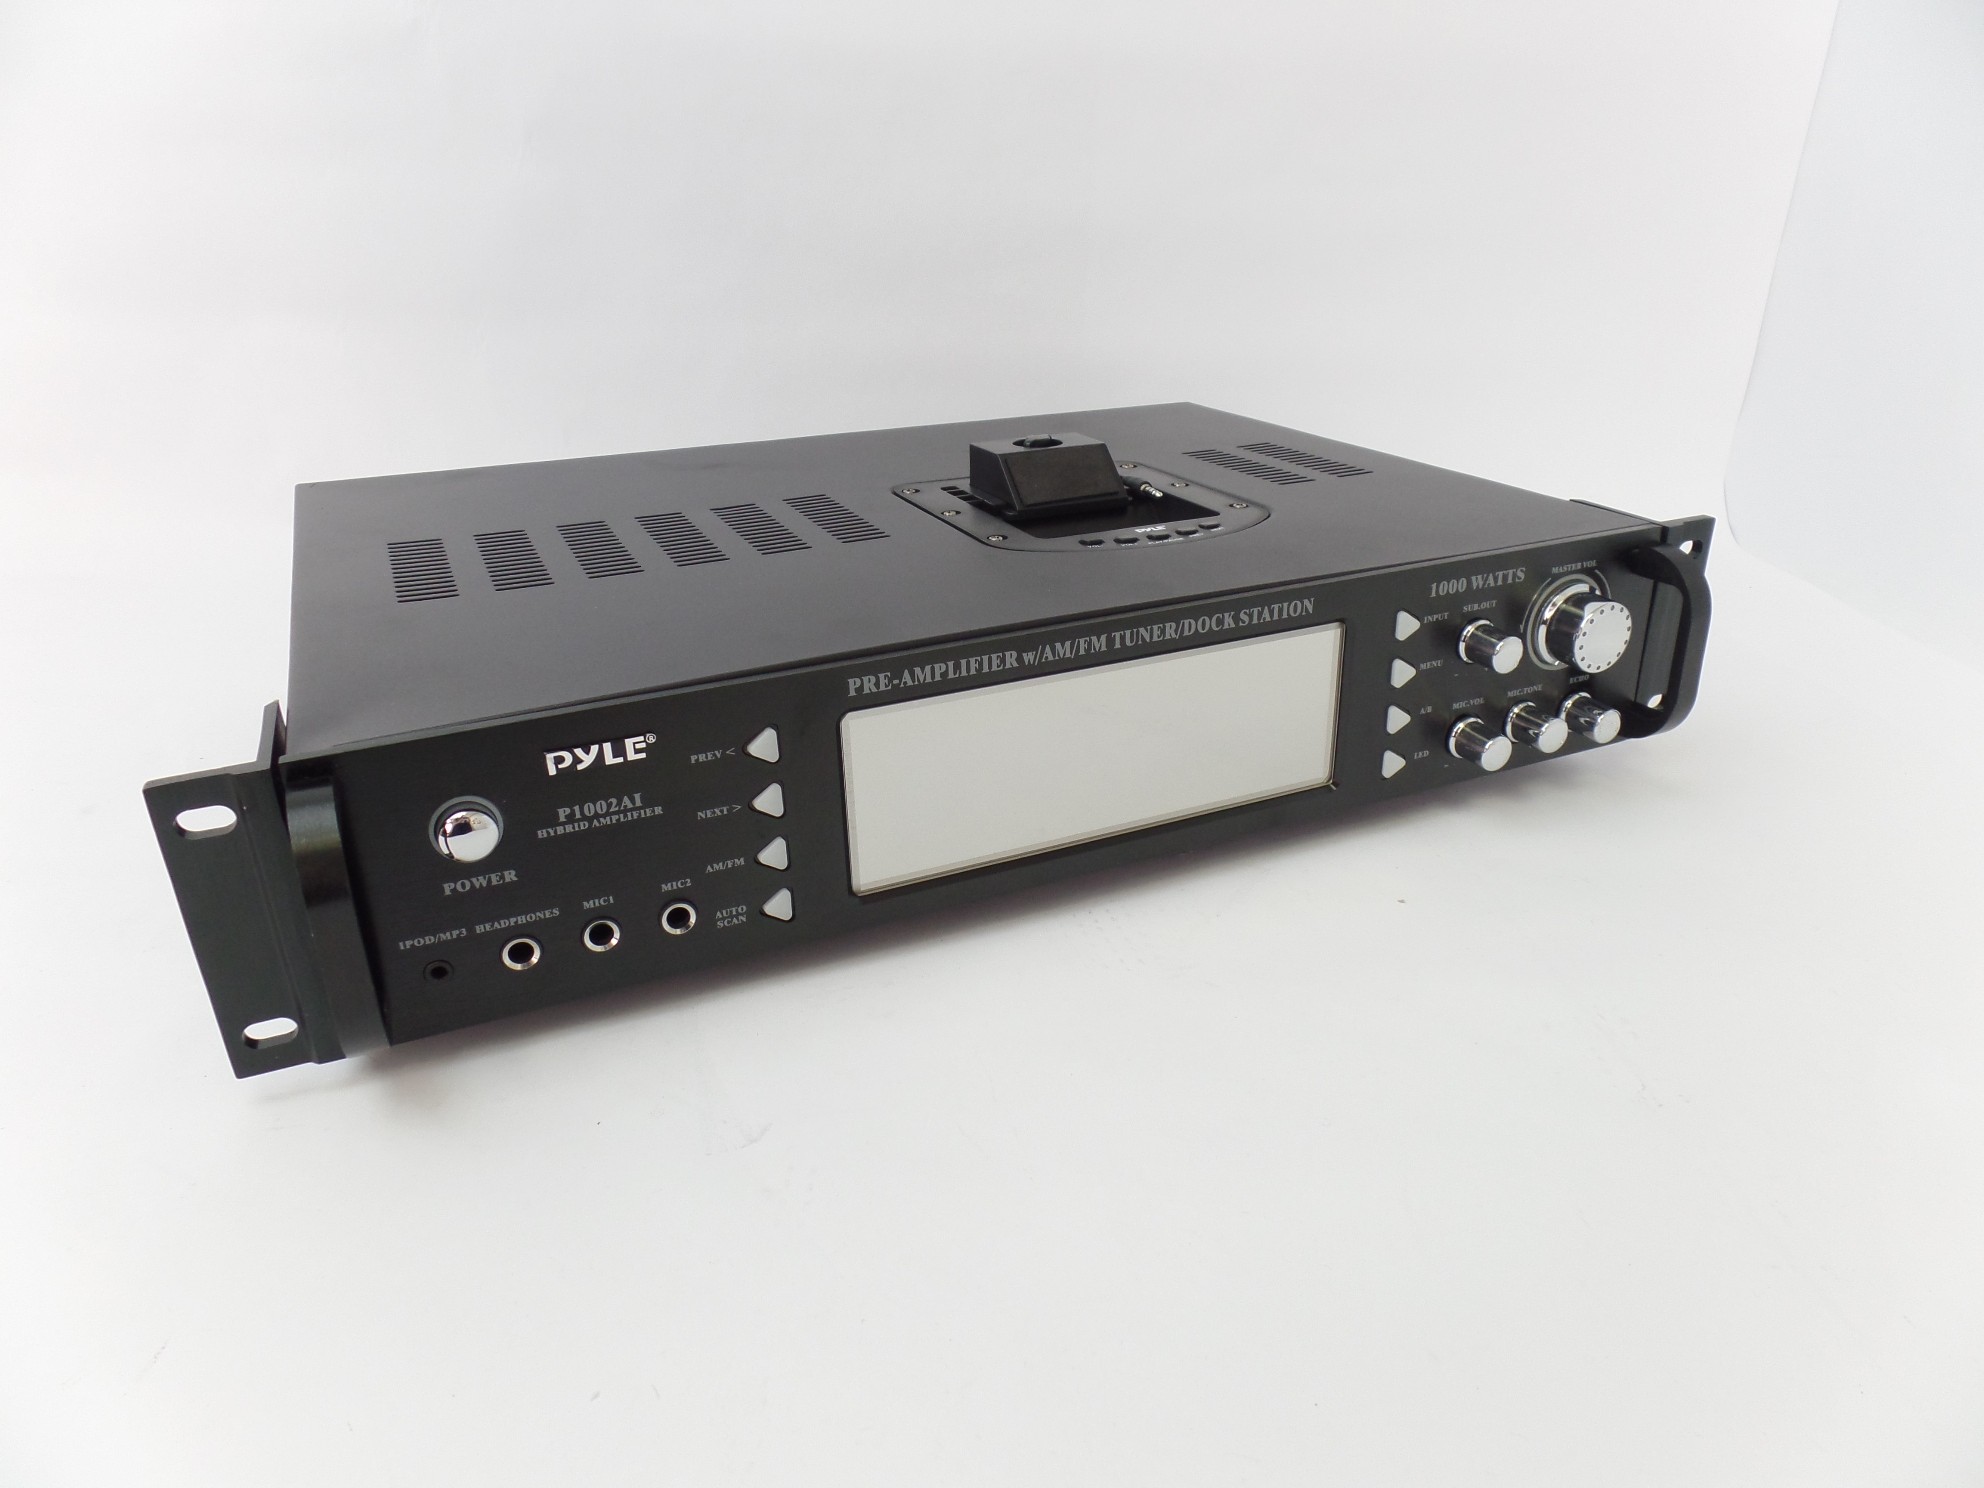 Pyle P1002AI 1000 Watts Hybrid Pre-Amplifier AM FM Tuner Dock Station For Parts